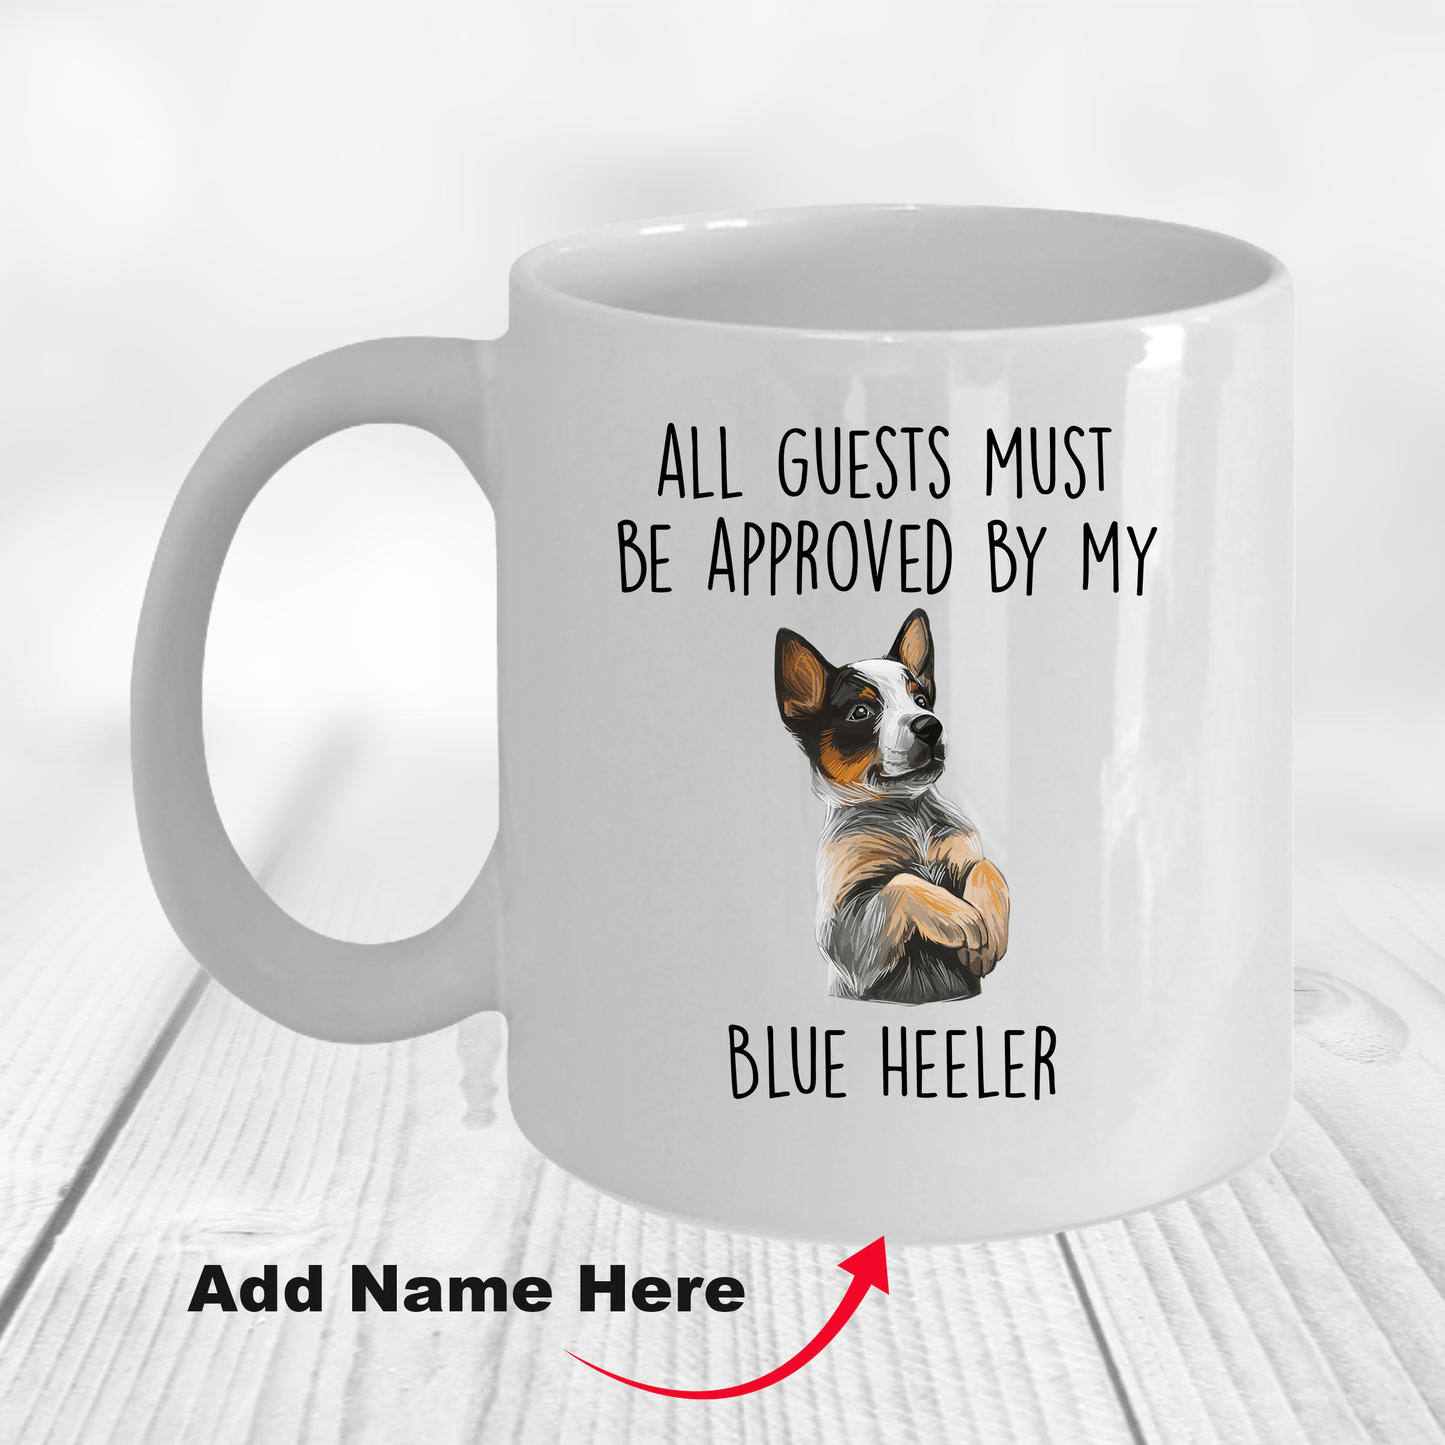 Funny All Guests Must Be Approved by My Blue Heeler Dog Ceramic Coffee Mug